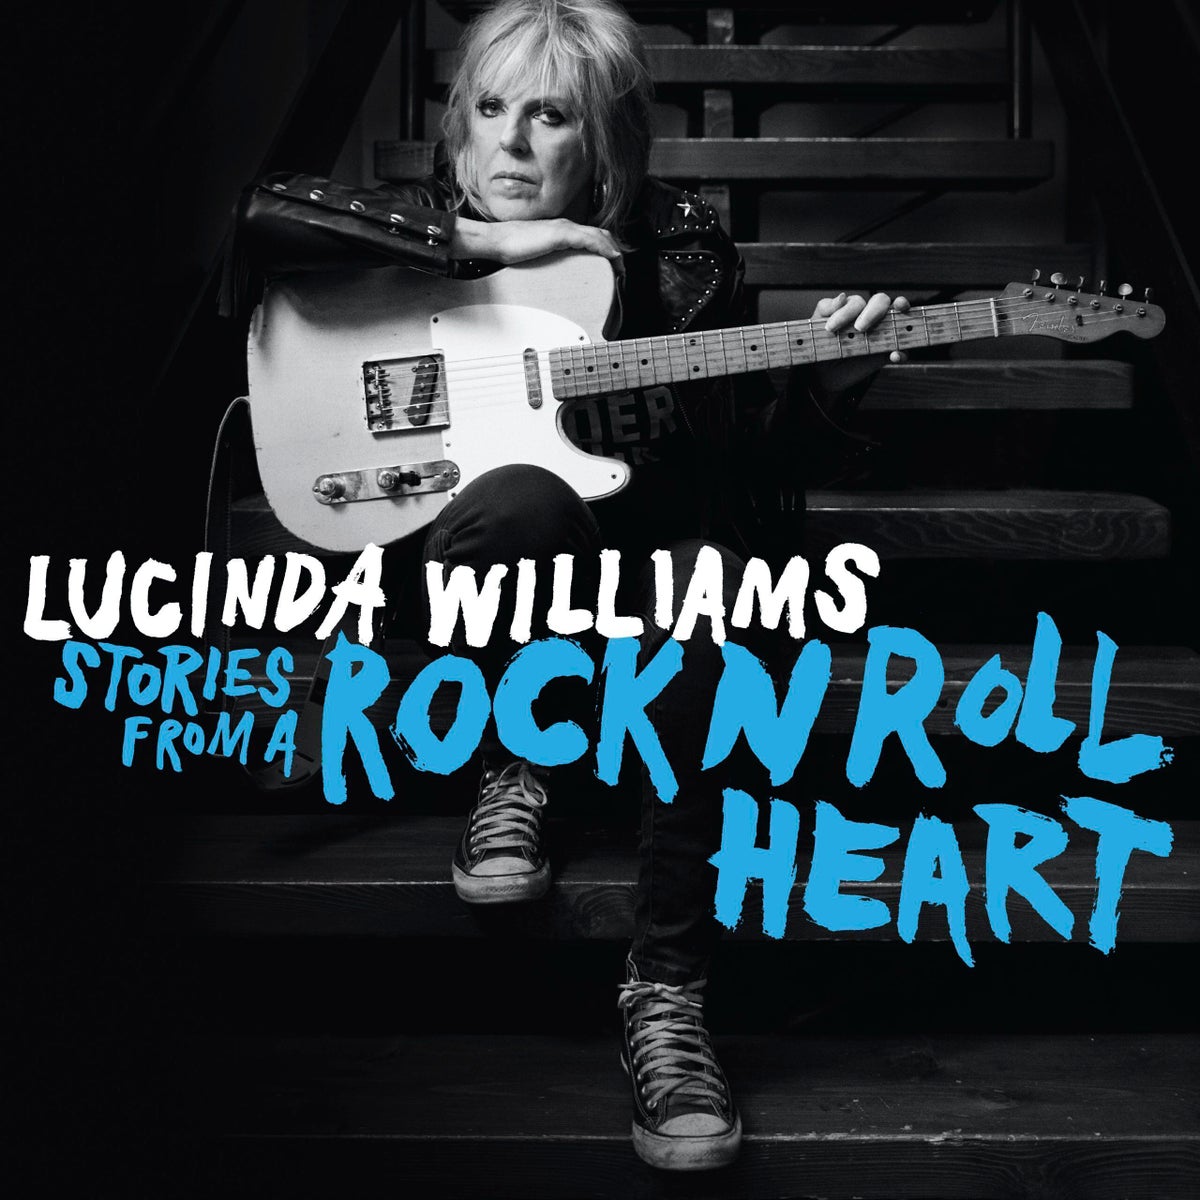 Music Review: Lucinda Williams at 70 is still finding her muse, still making music that matters